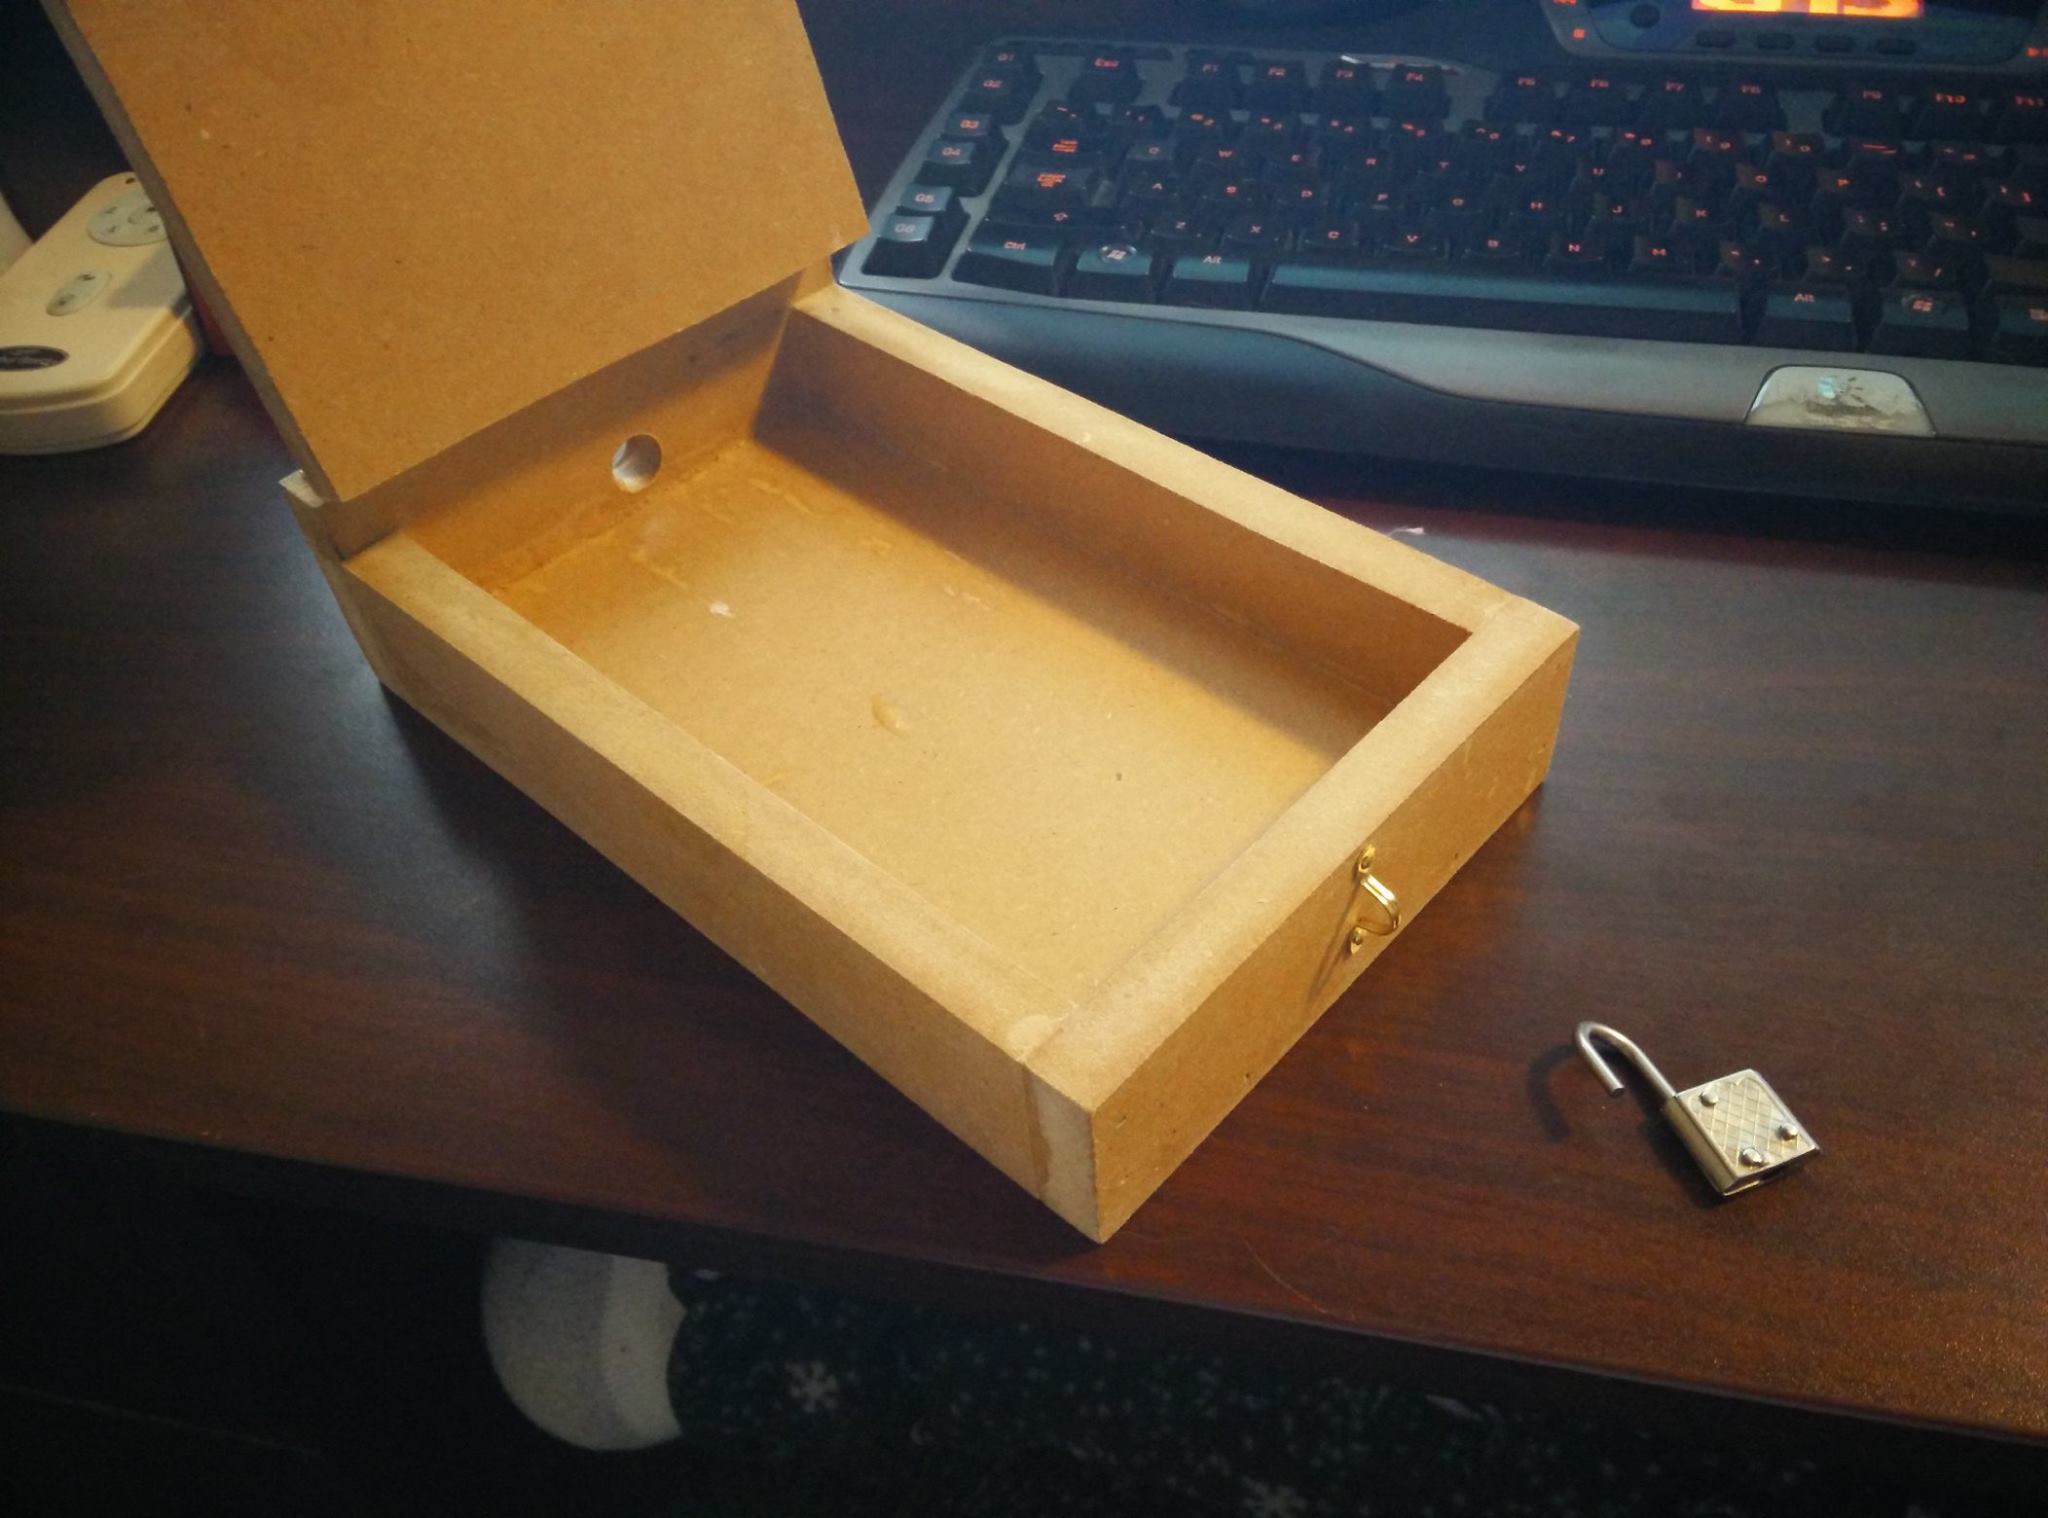 So I made a quick cheap lock box out...